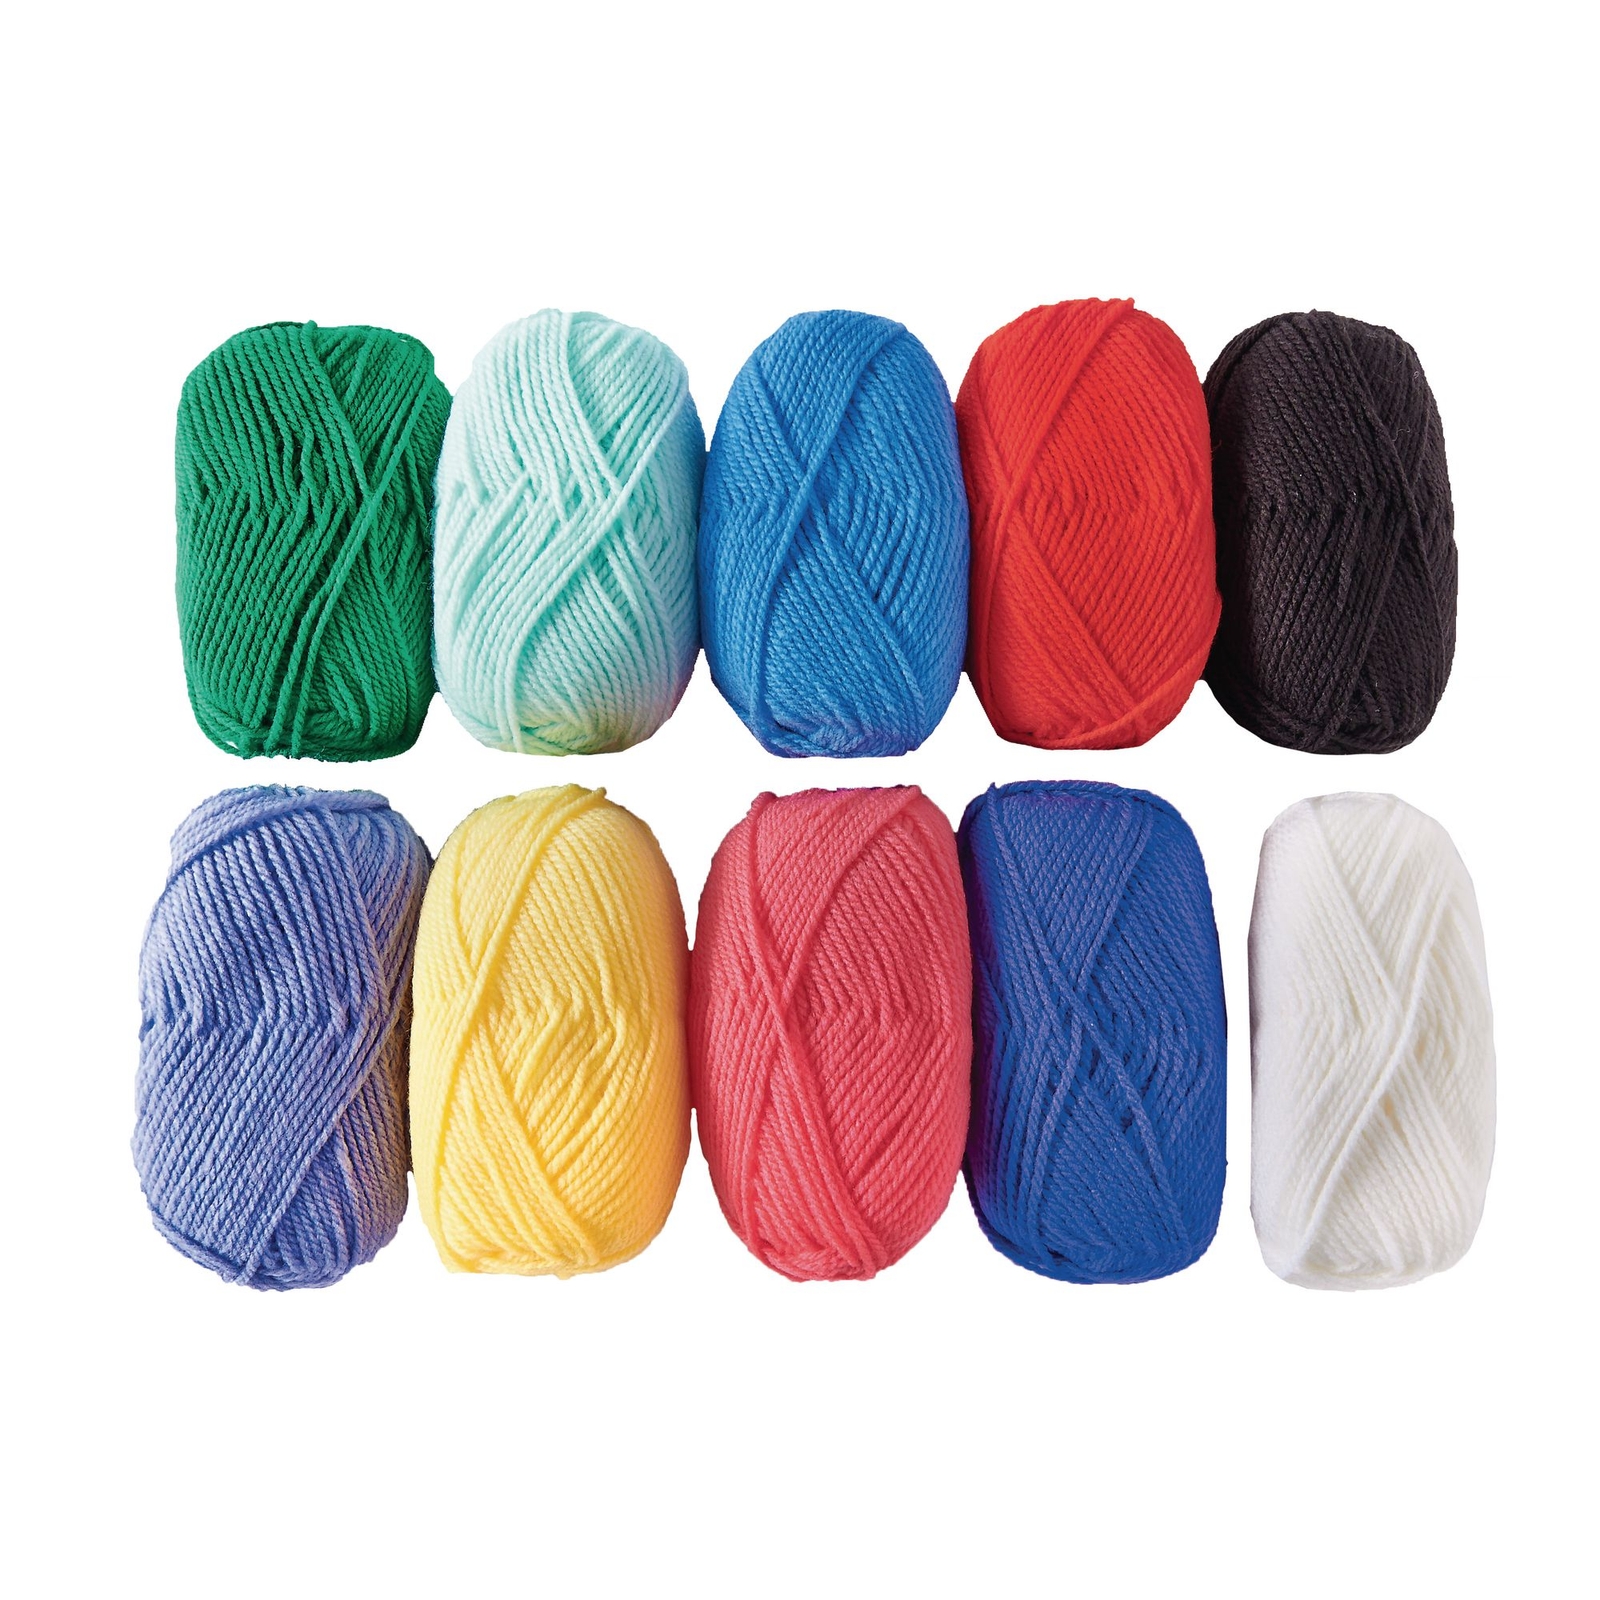 Chunky Knit Yarn Pack of 10